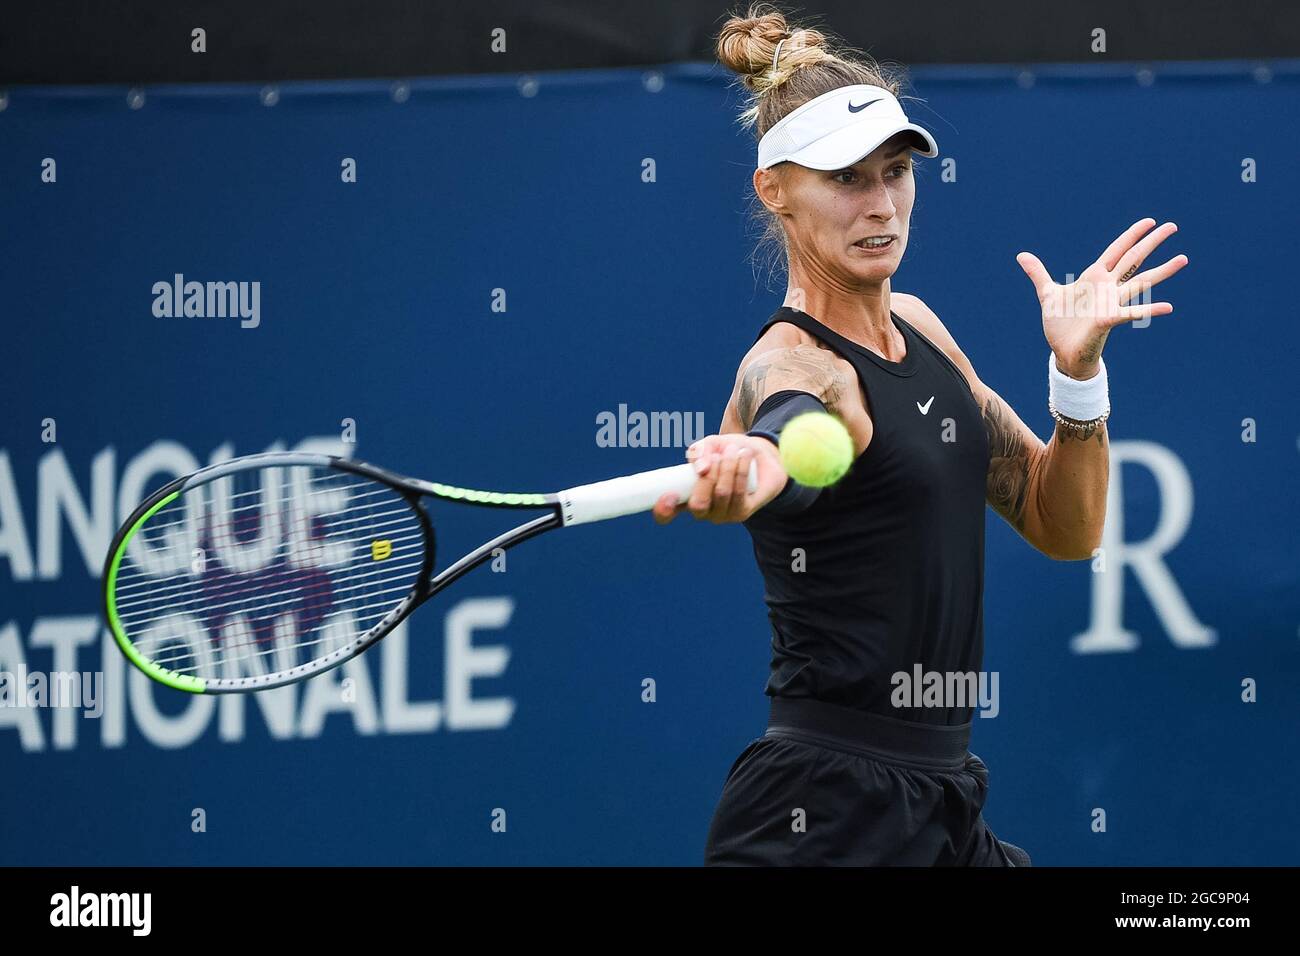 August 07, 2021: Polona Hercog (SLO) gets ready to return the ball during  the WTA National Bank Open qualifying round match at IGA Stadium in  Montreal, Quebec. David Kirouac/CSM Stock Photo - Alamy